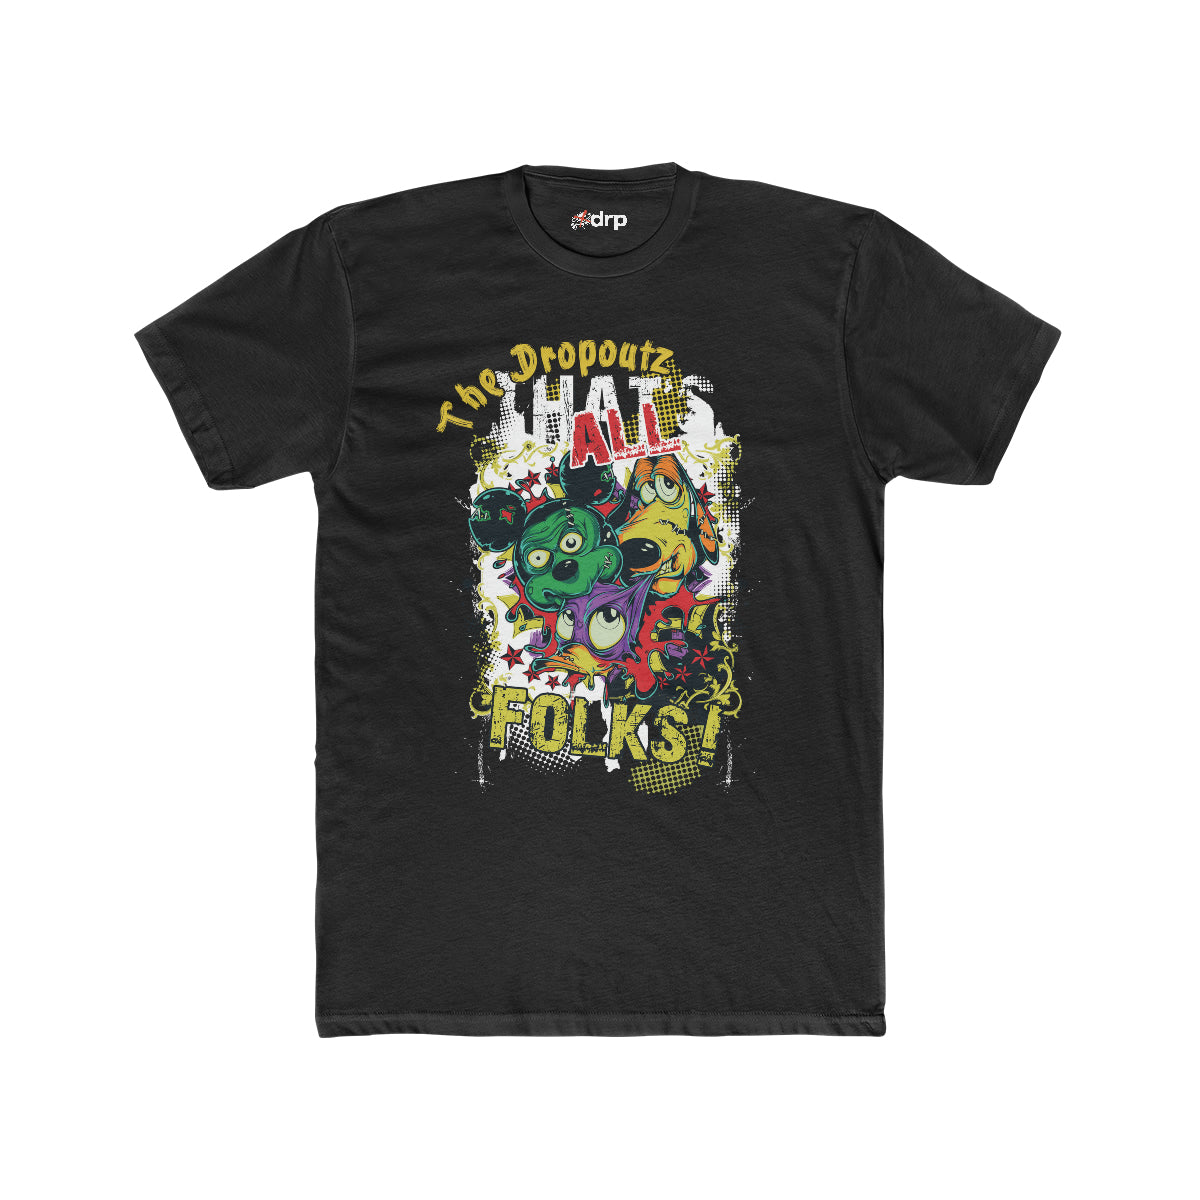 DRP - That's All Folks Tee